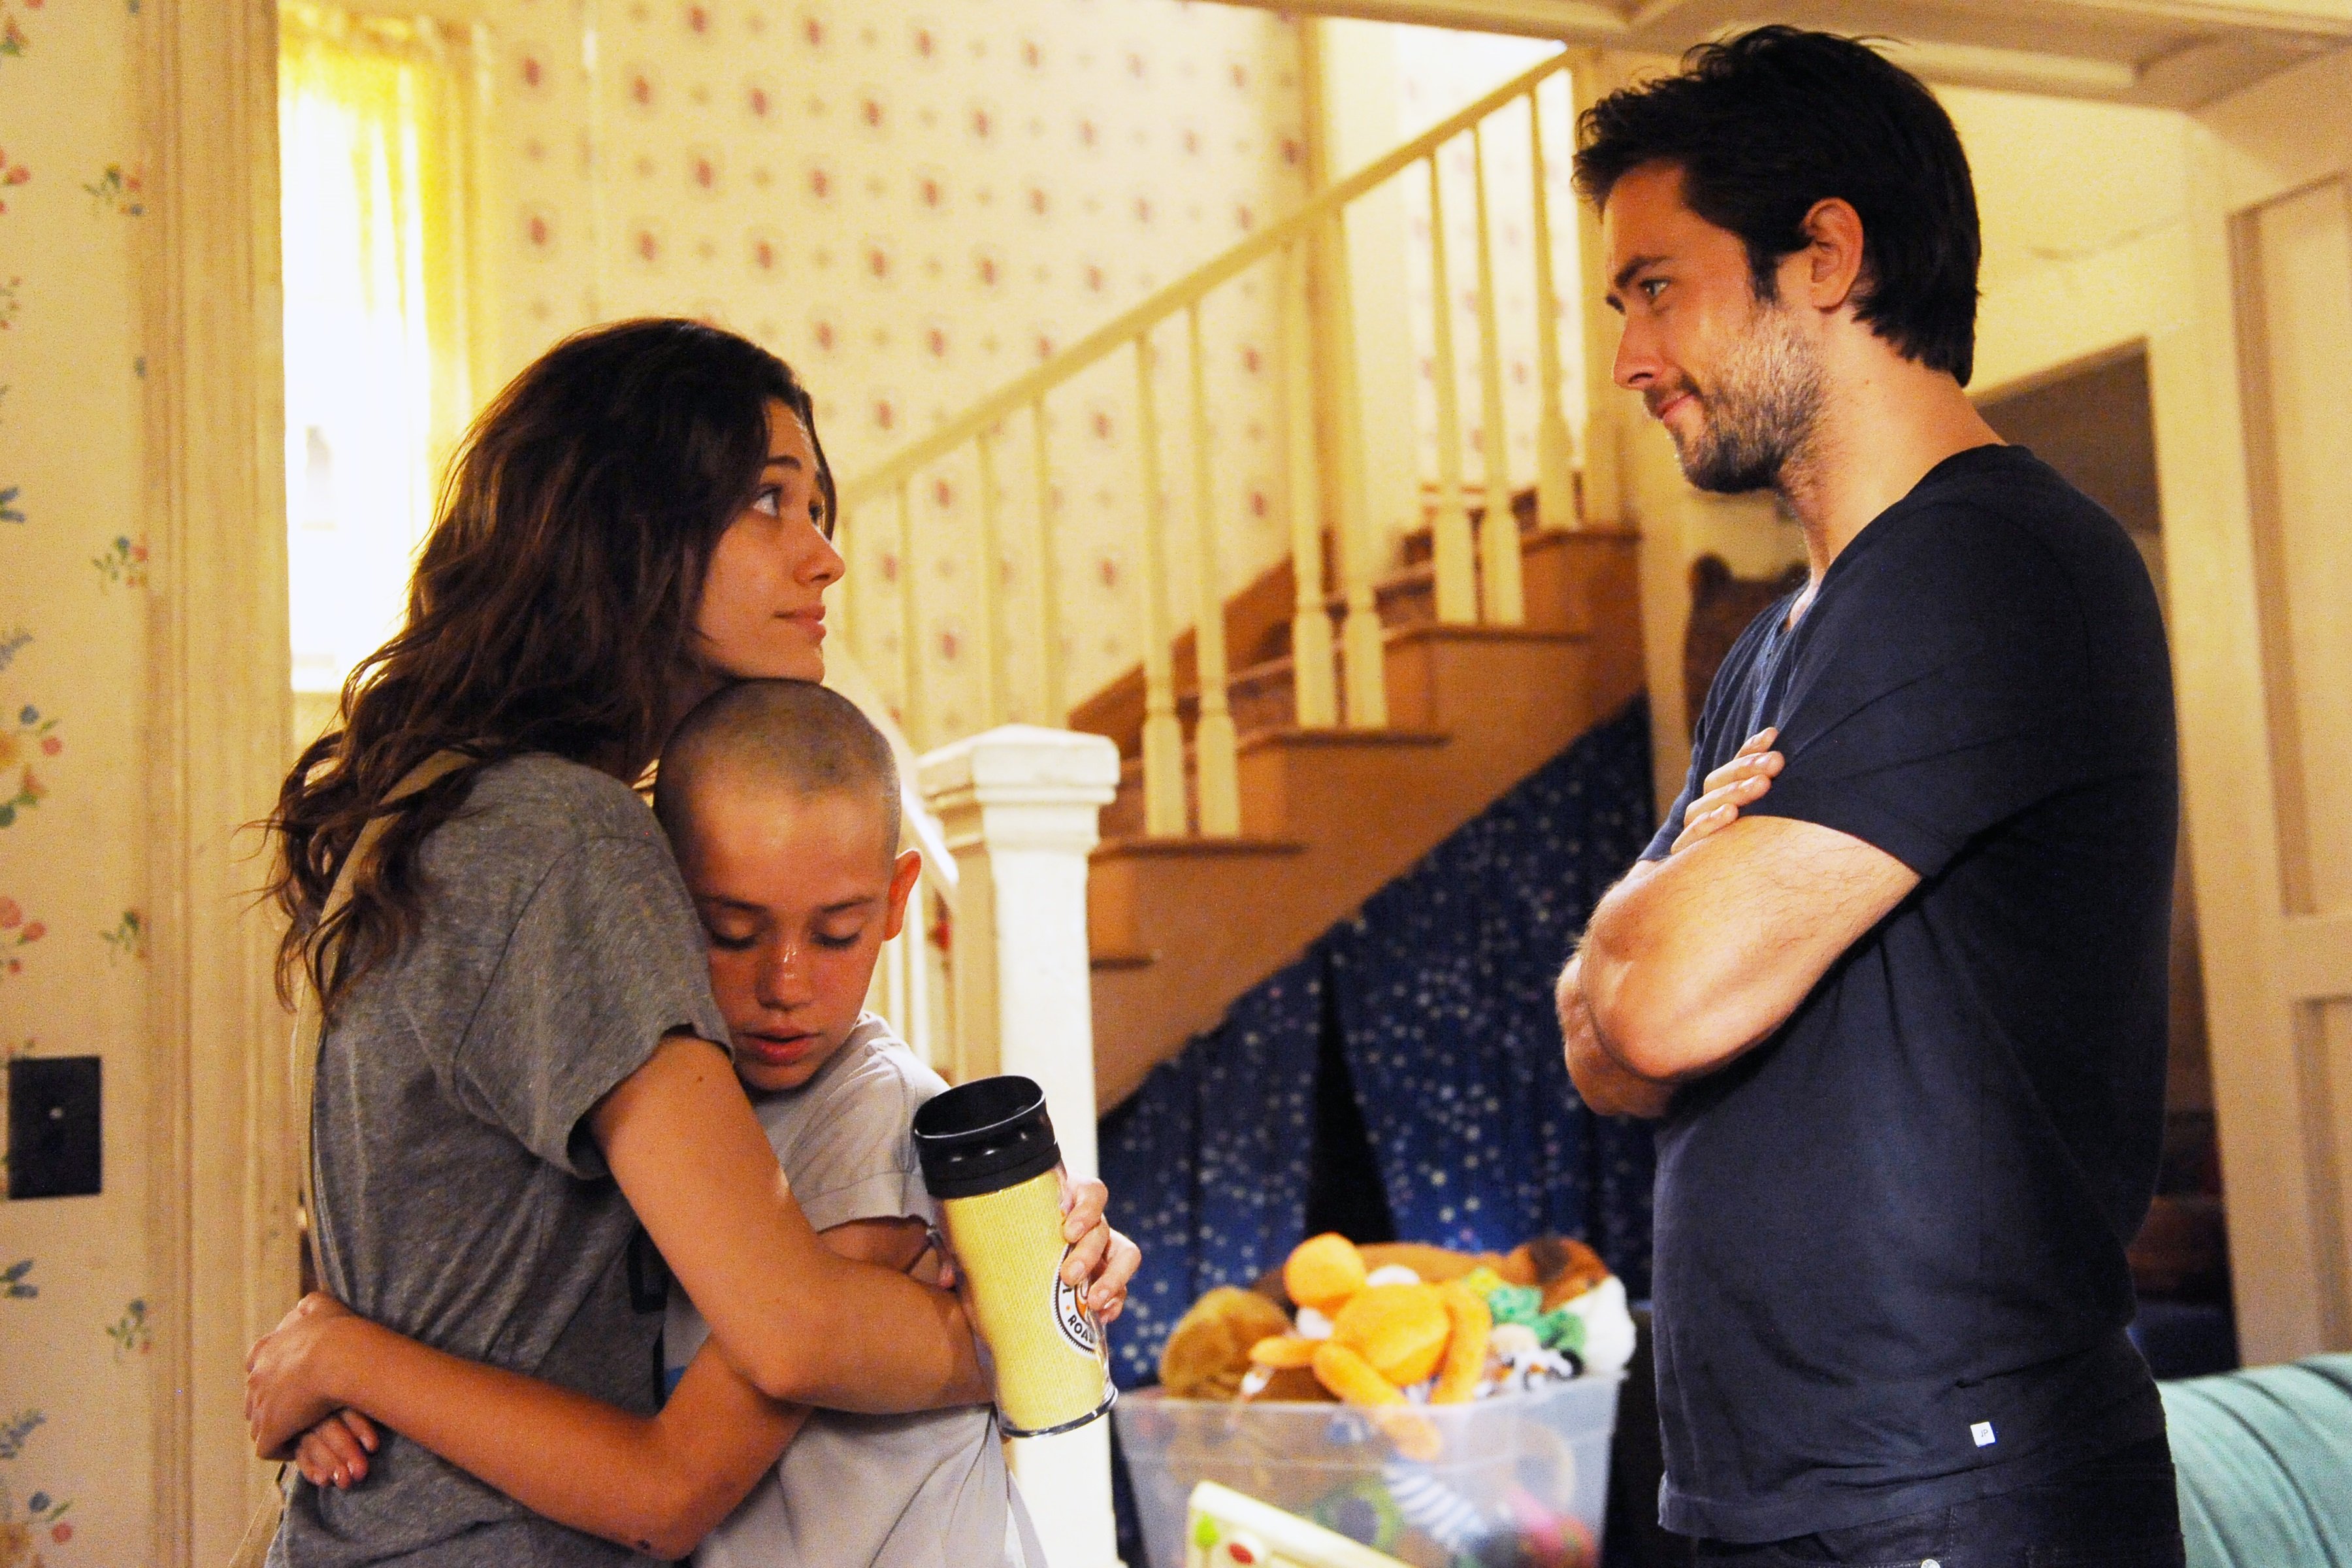 Emmy Rossum as Fiona Gallagher, Ethan Cutkosky as Carl Gallagher and Justin Chatwin as Jimmy in Shameless